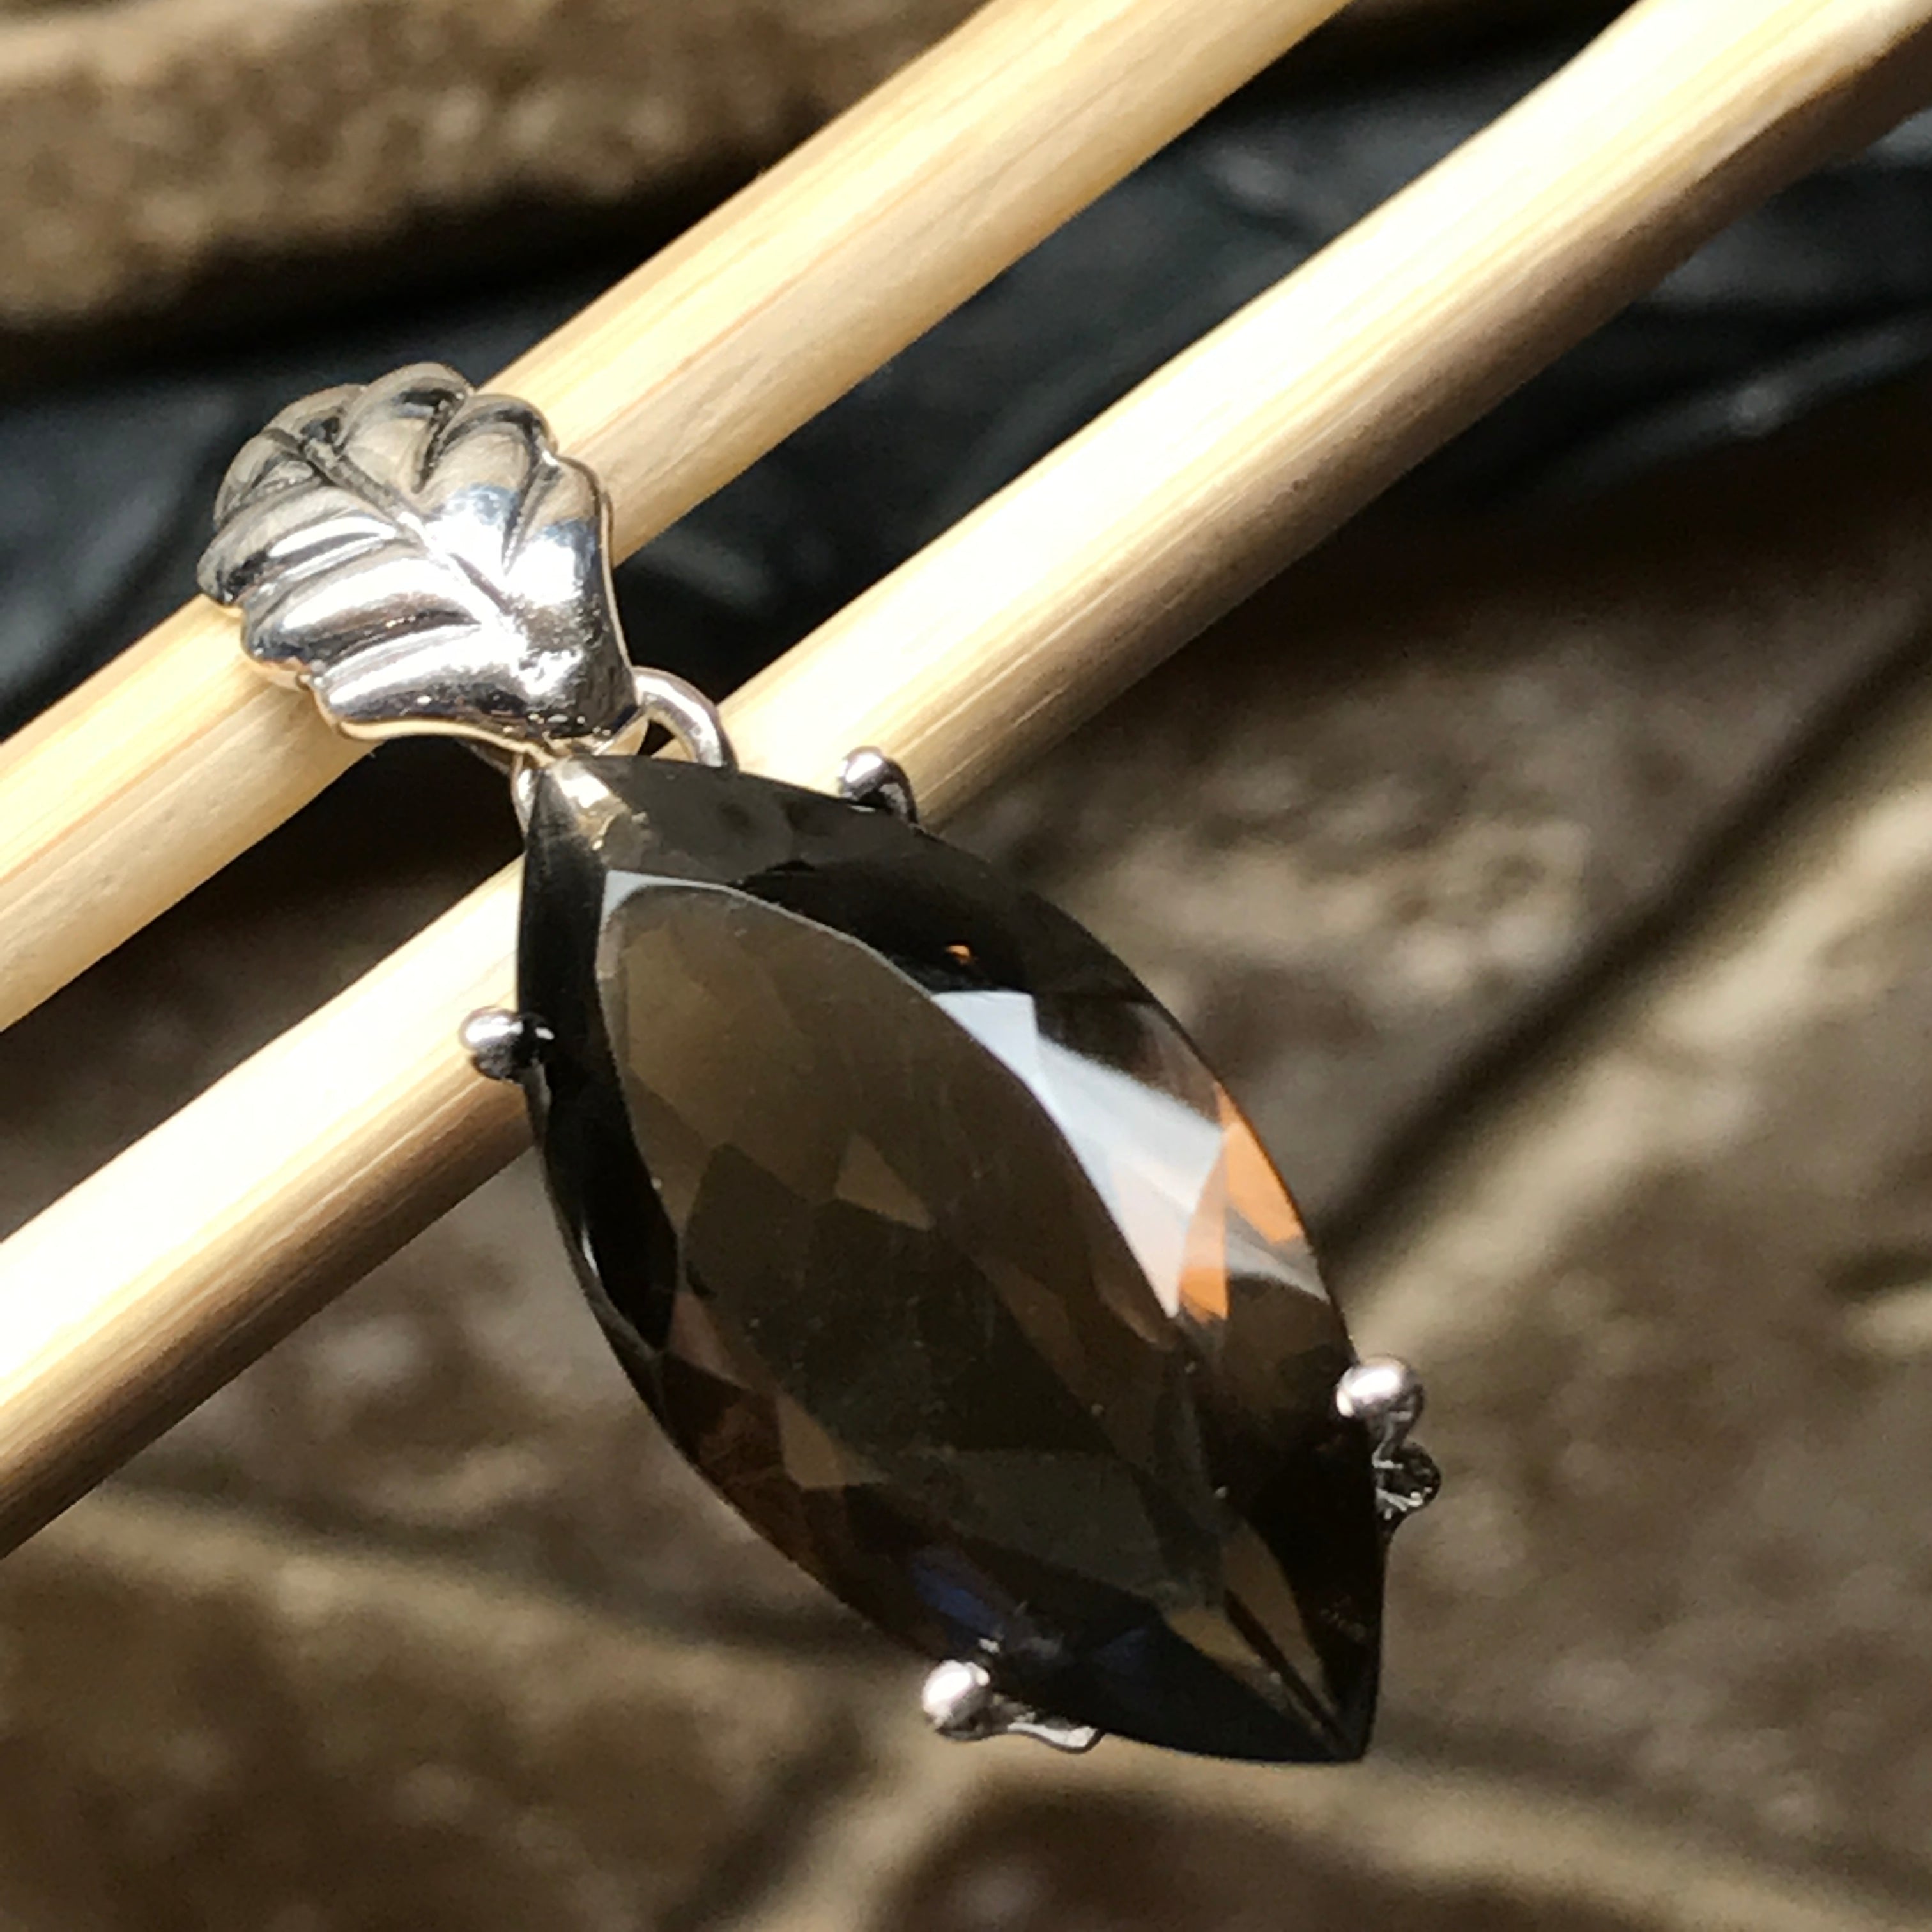 Natural 10ct Smoky Topaz 925 Solid Sterling Silver Pendant 35mm - Natural Rocks by Kala